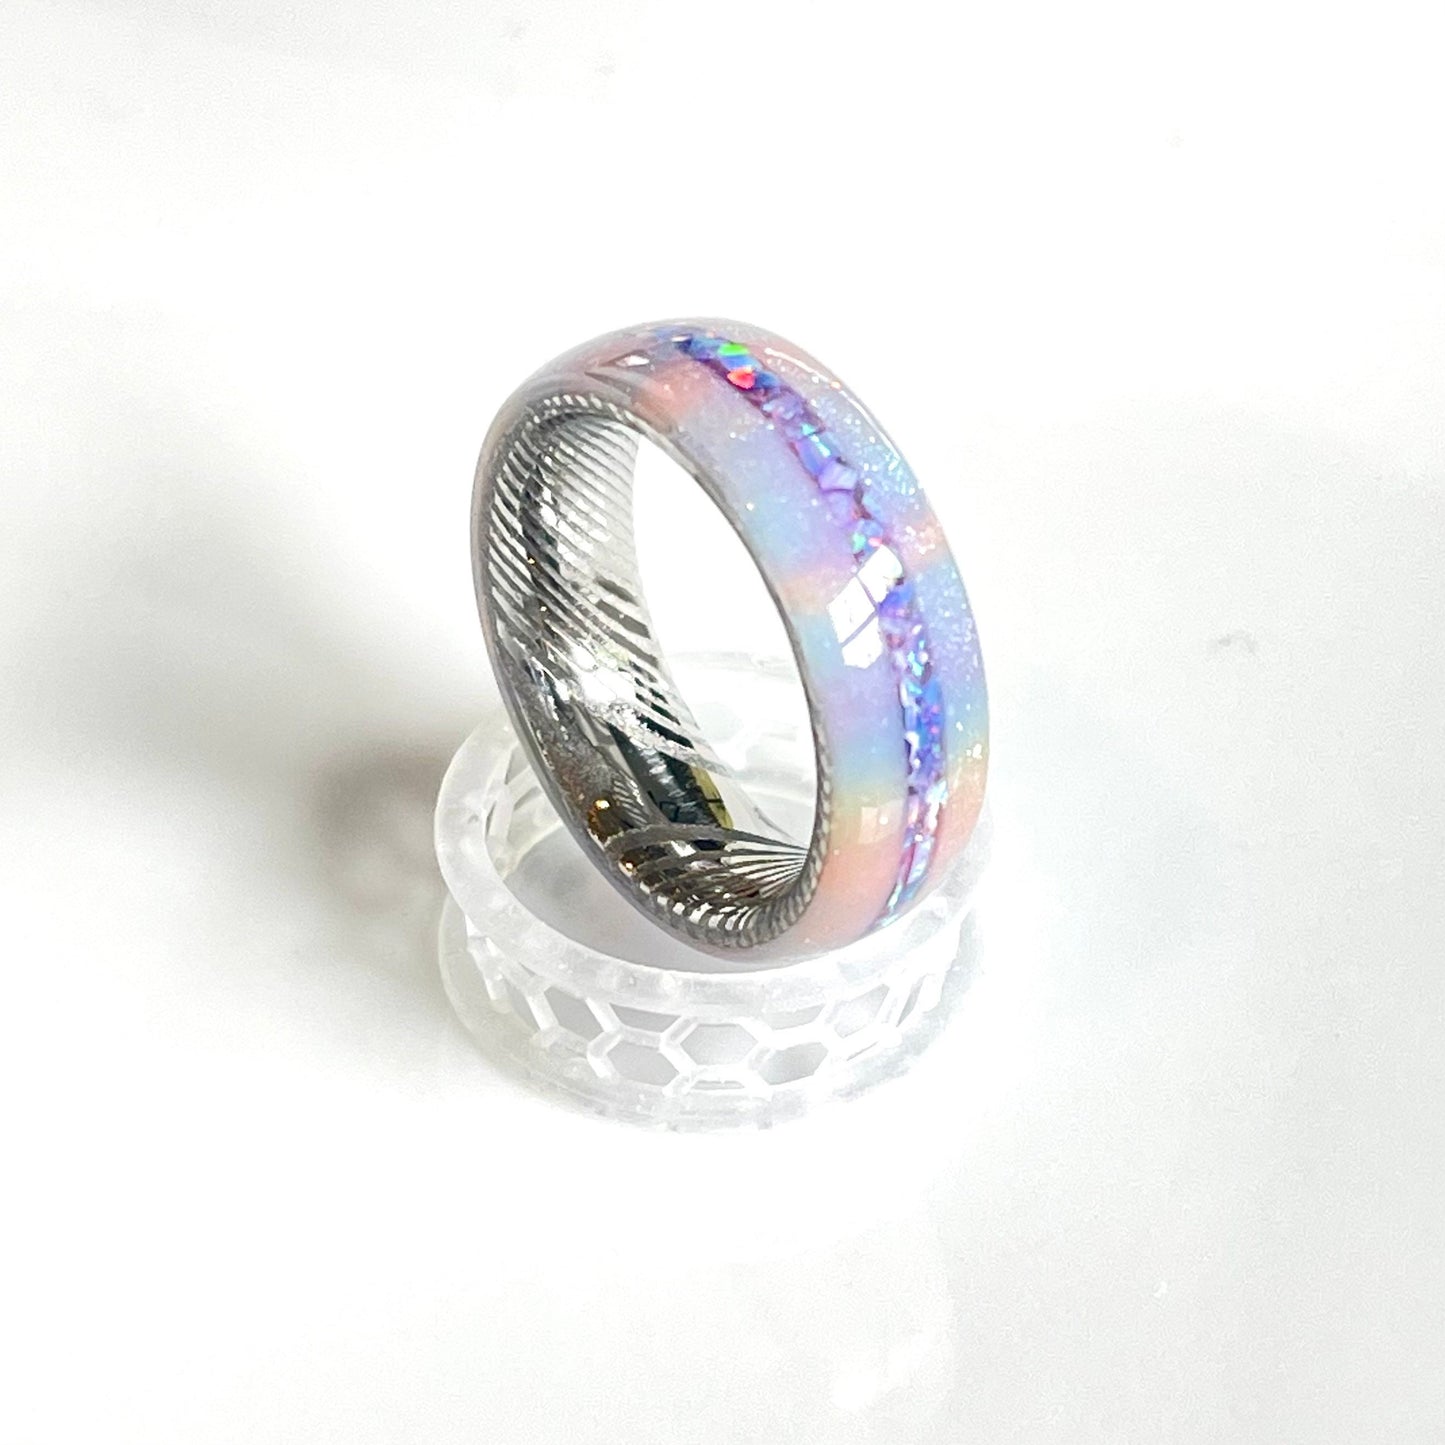 6mm Unicorn Ring with Opal Accent